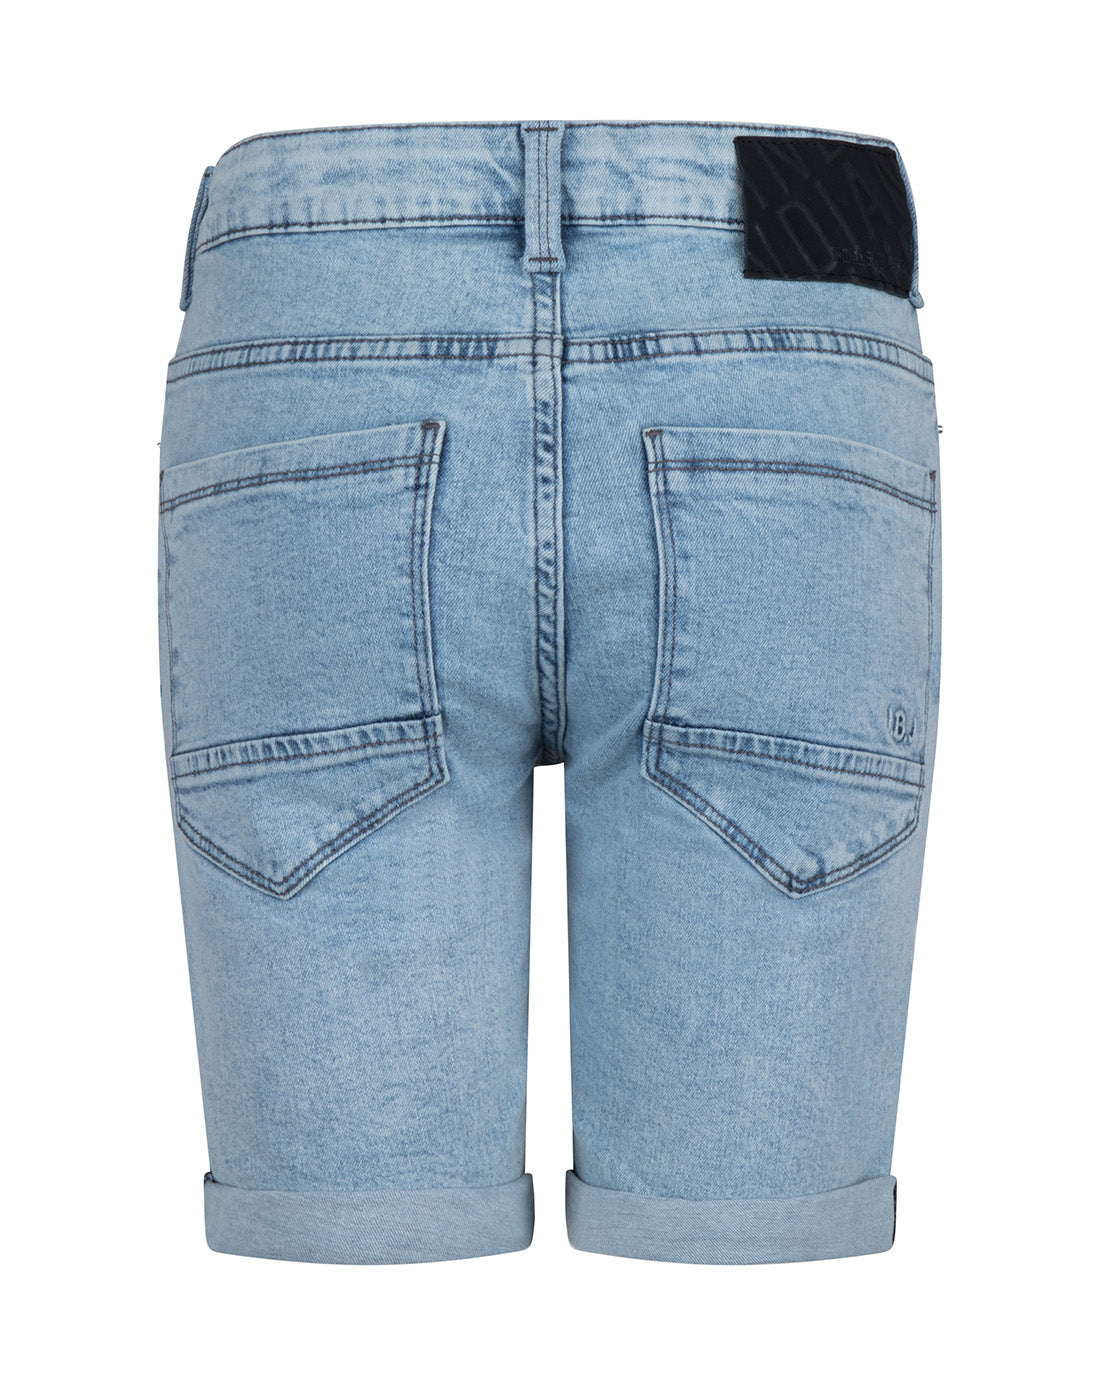 Indian Blue Jeans BLUE ANDY SHORT